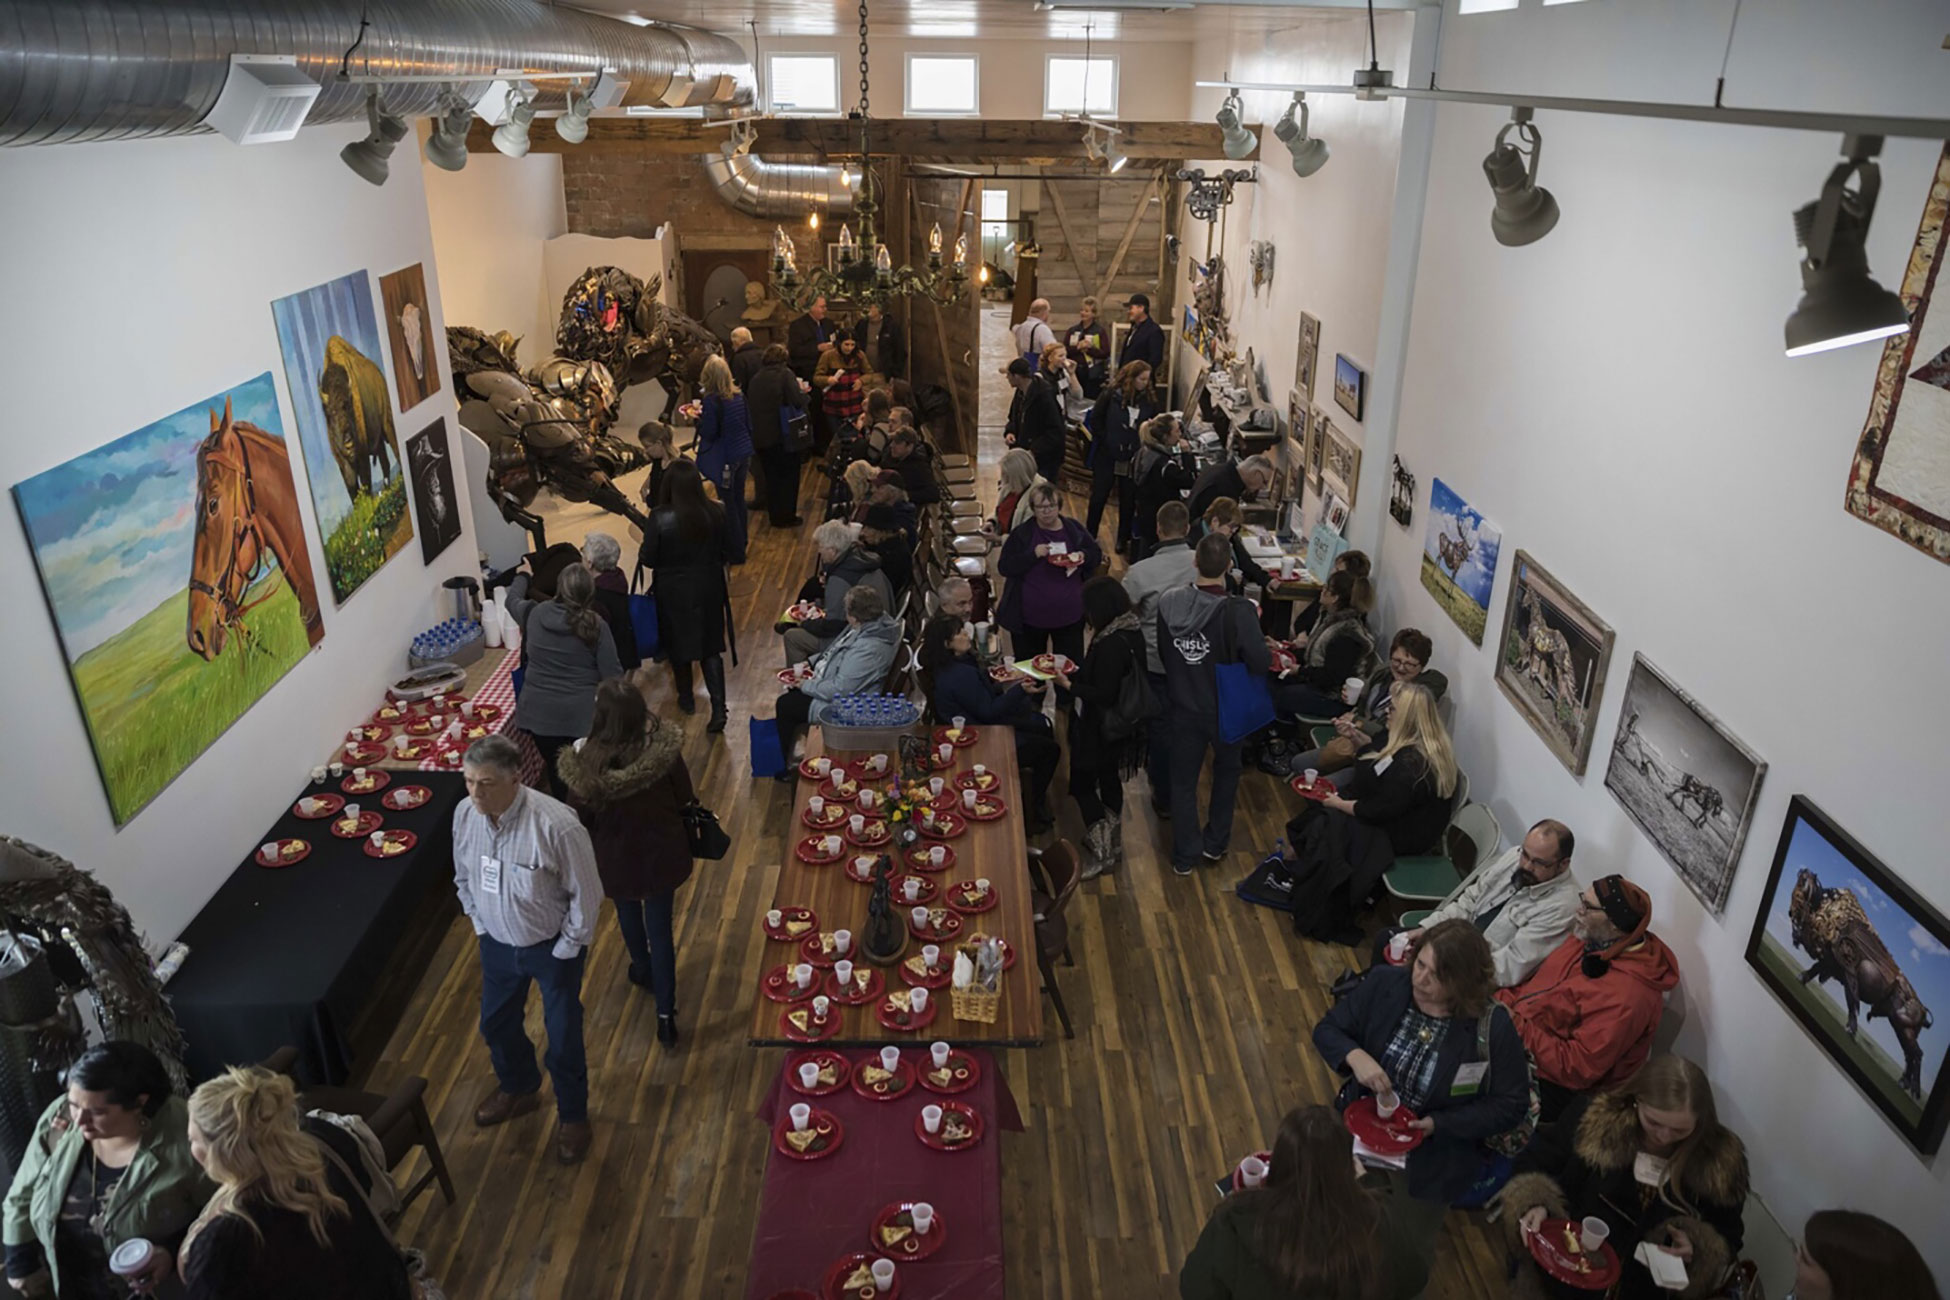 A crowd of Energize Conference attendees enjoying refreshments served in a local art gallery.